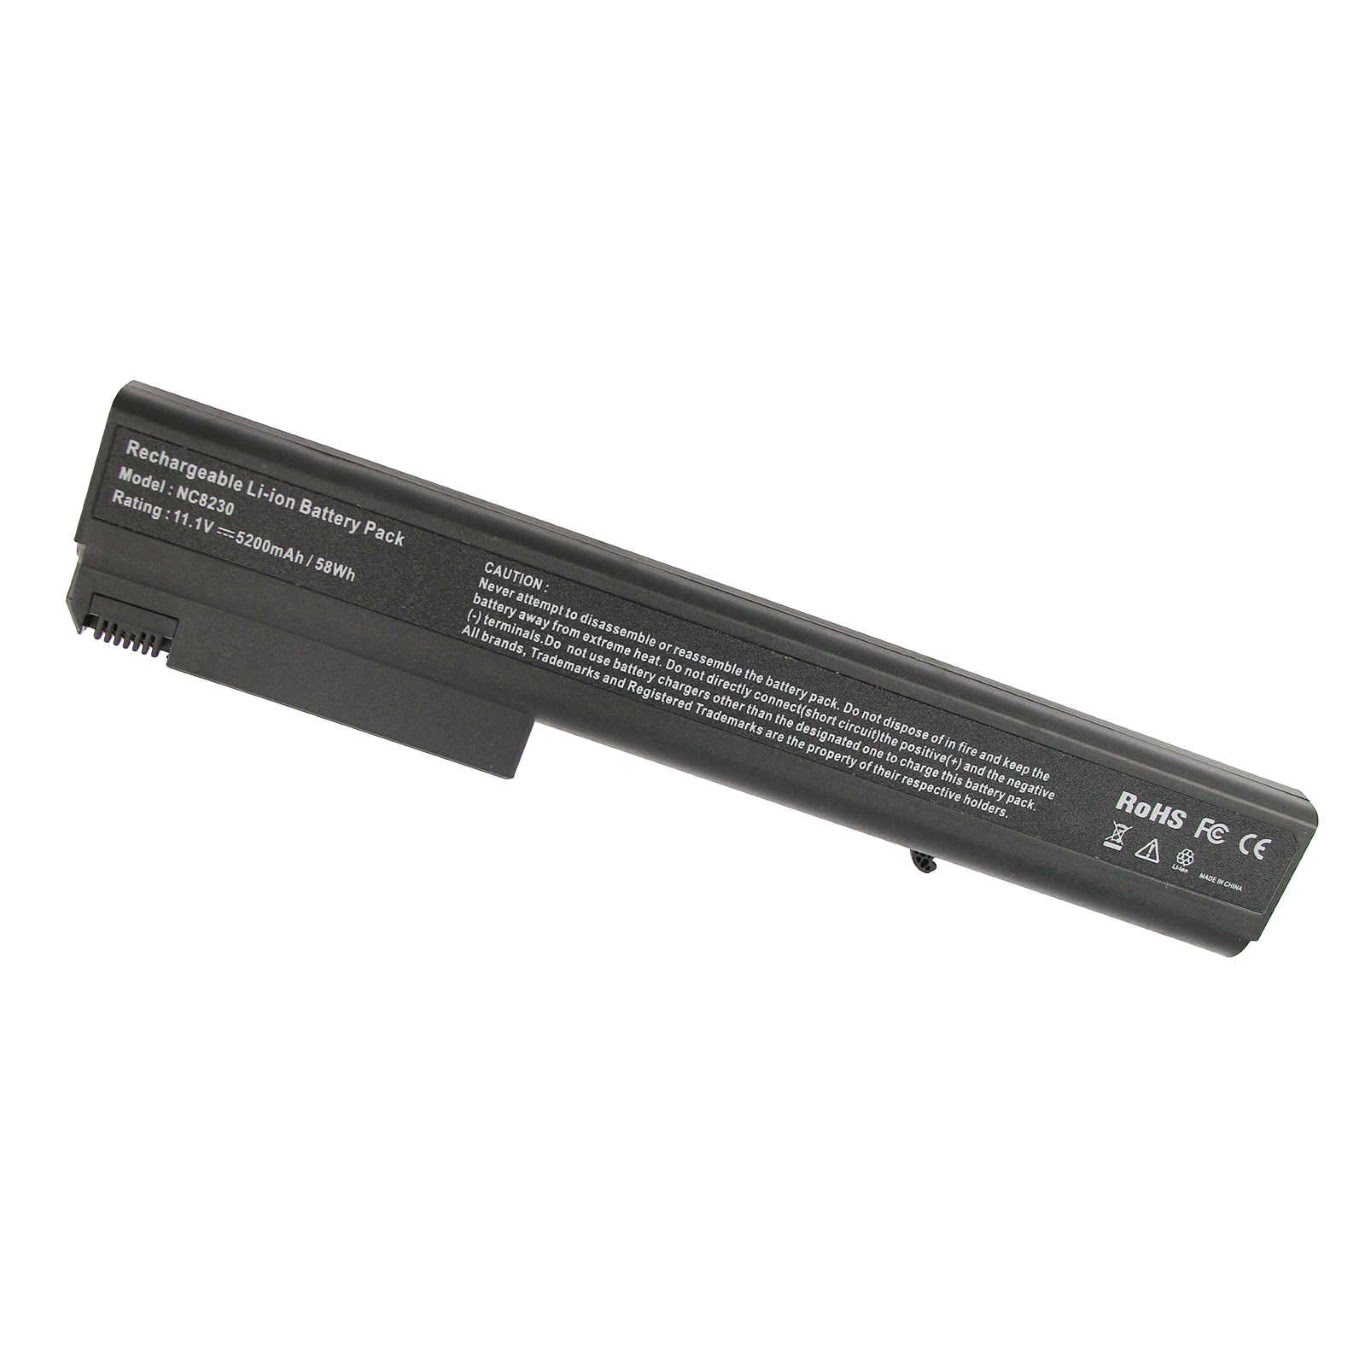 361909-001, 361909-002 replacement Laptop Battery for HP Business Notebook 6720t, Business Notebook 7400, 10.8V, 6 cells, 4400mAh